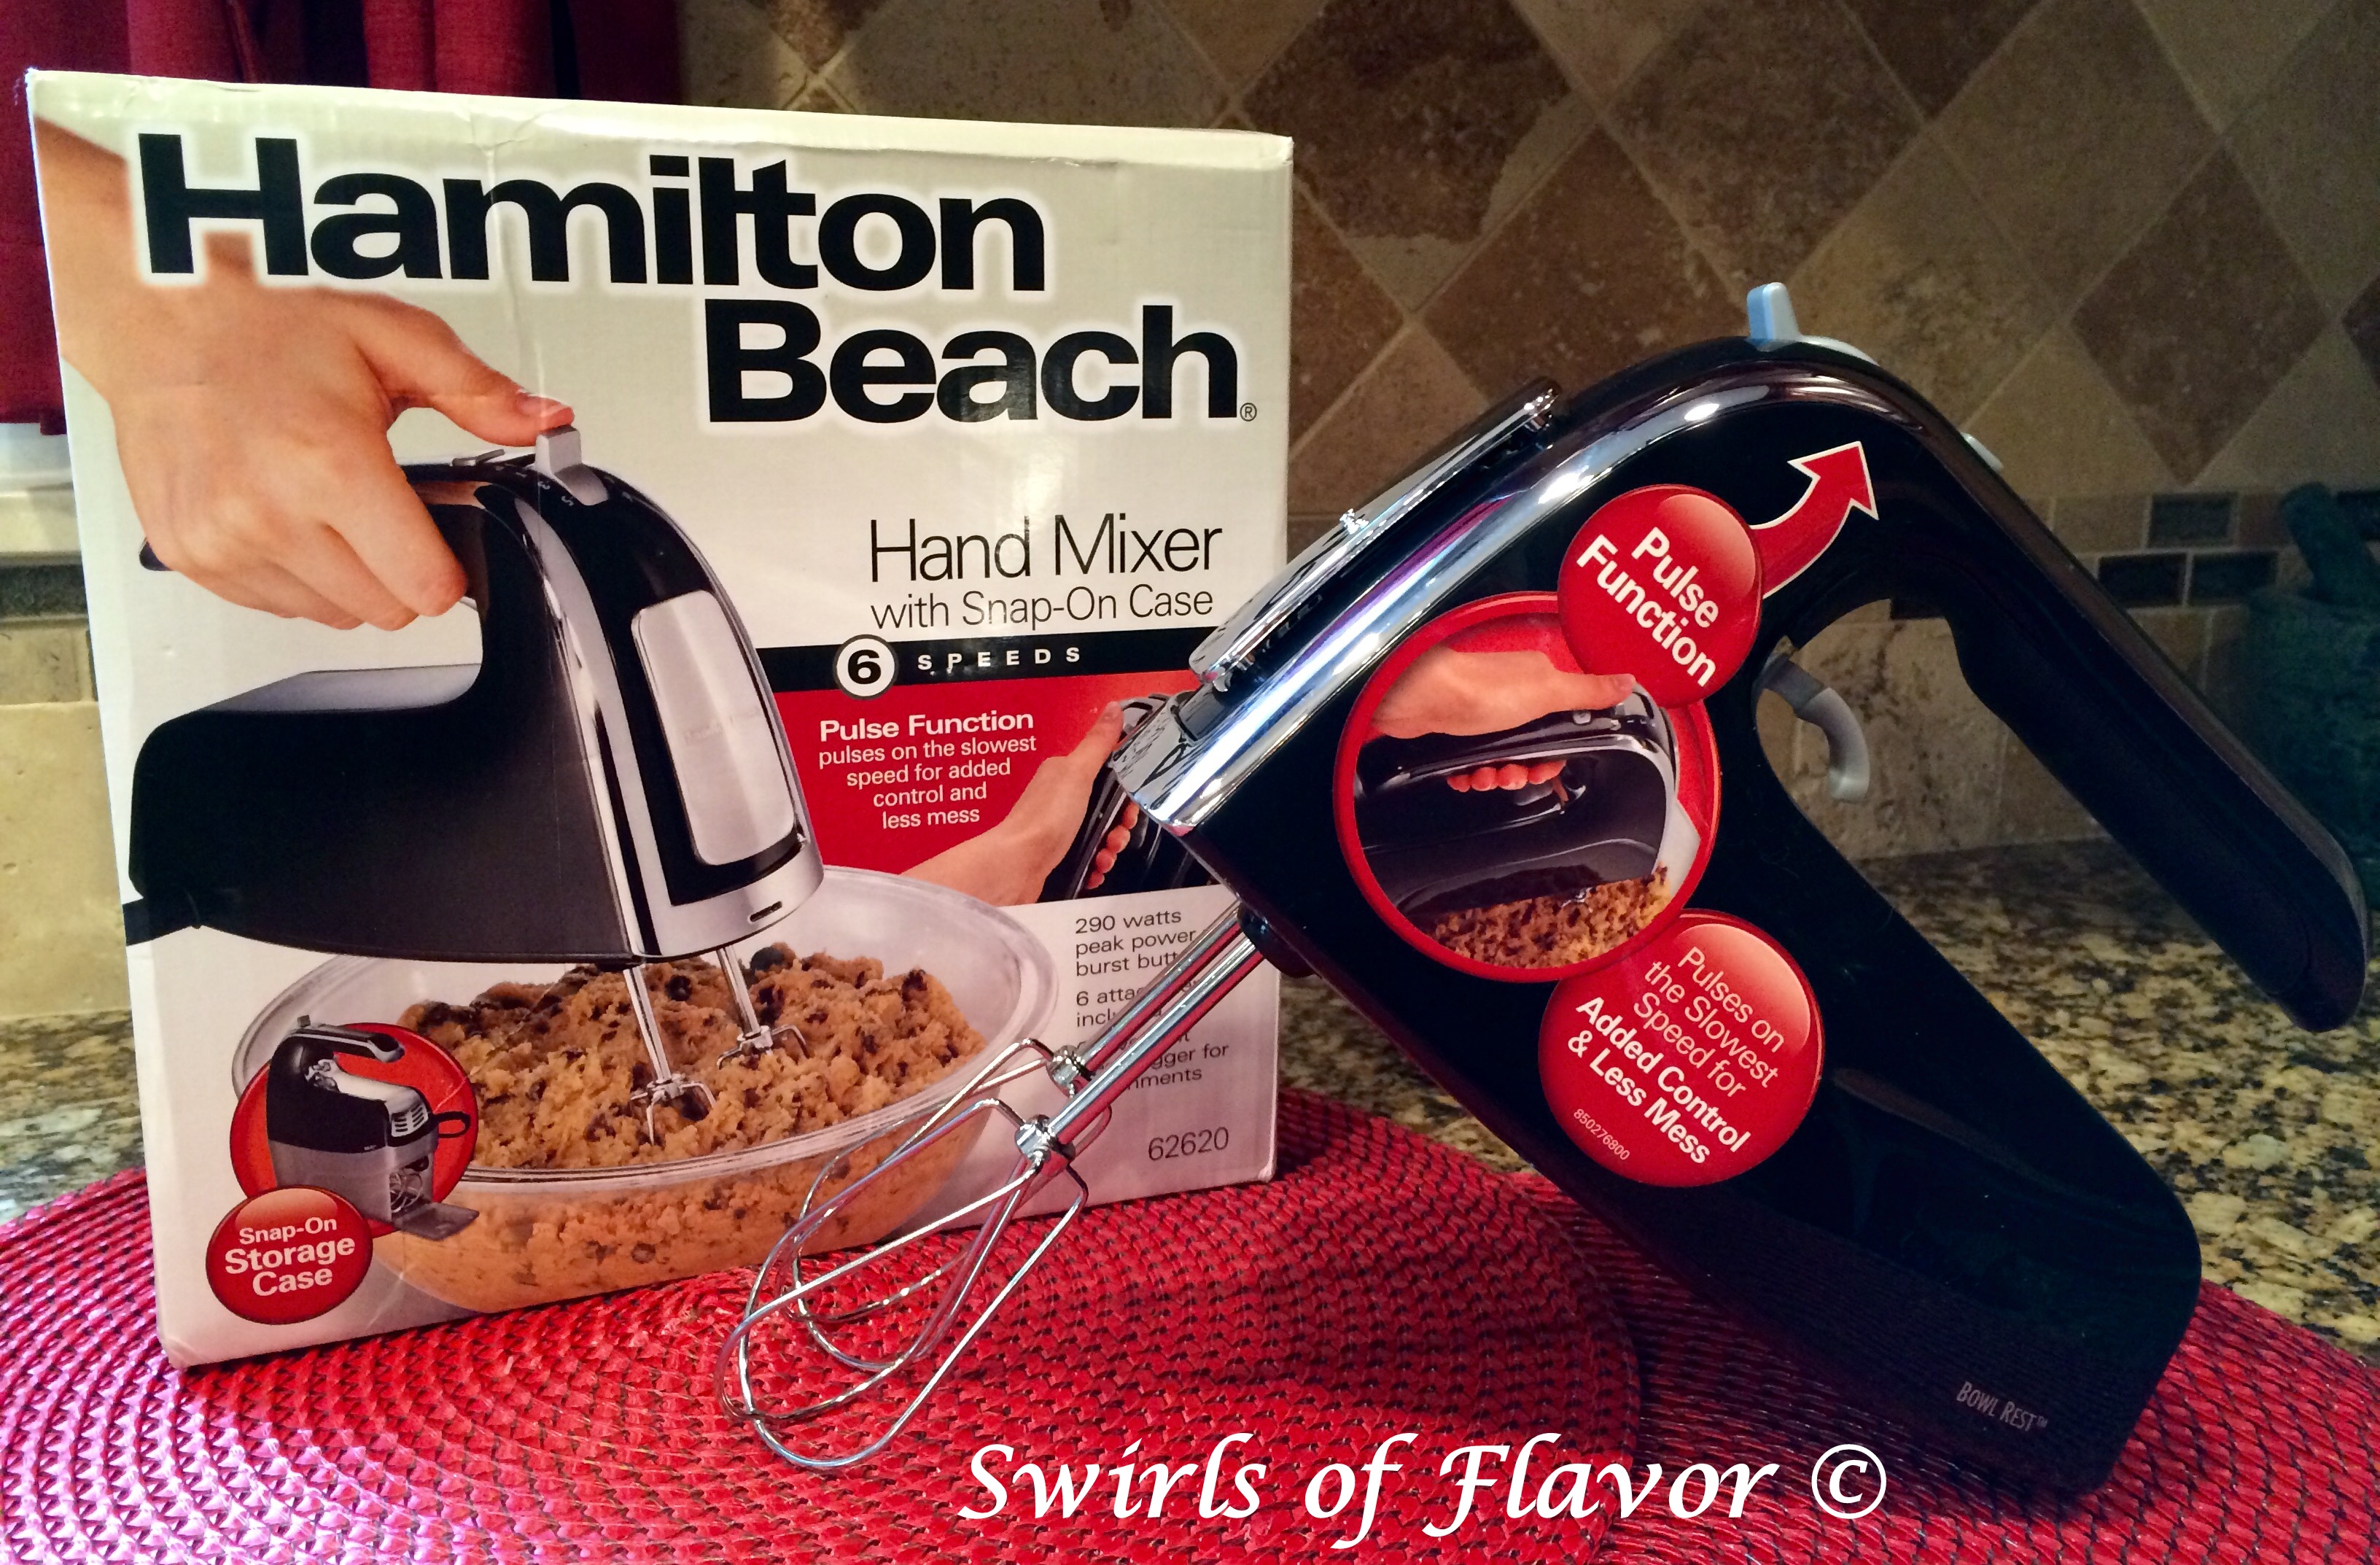 Hamilton Beach 6 Speed Hand Mixer With Pulse and Snap-On Case Giveaway